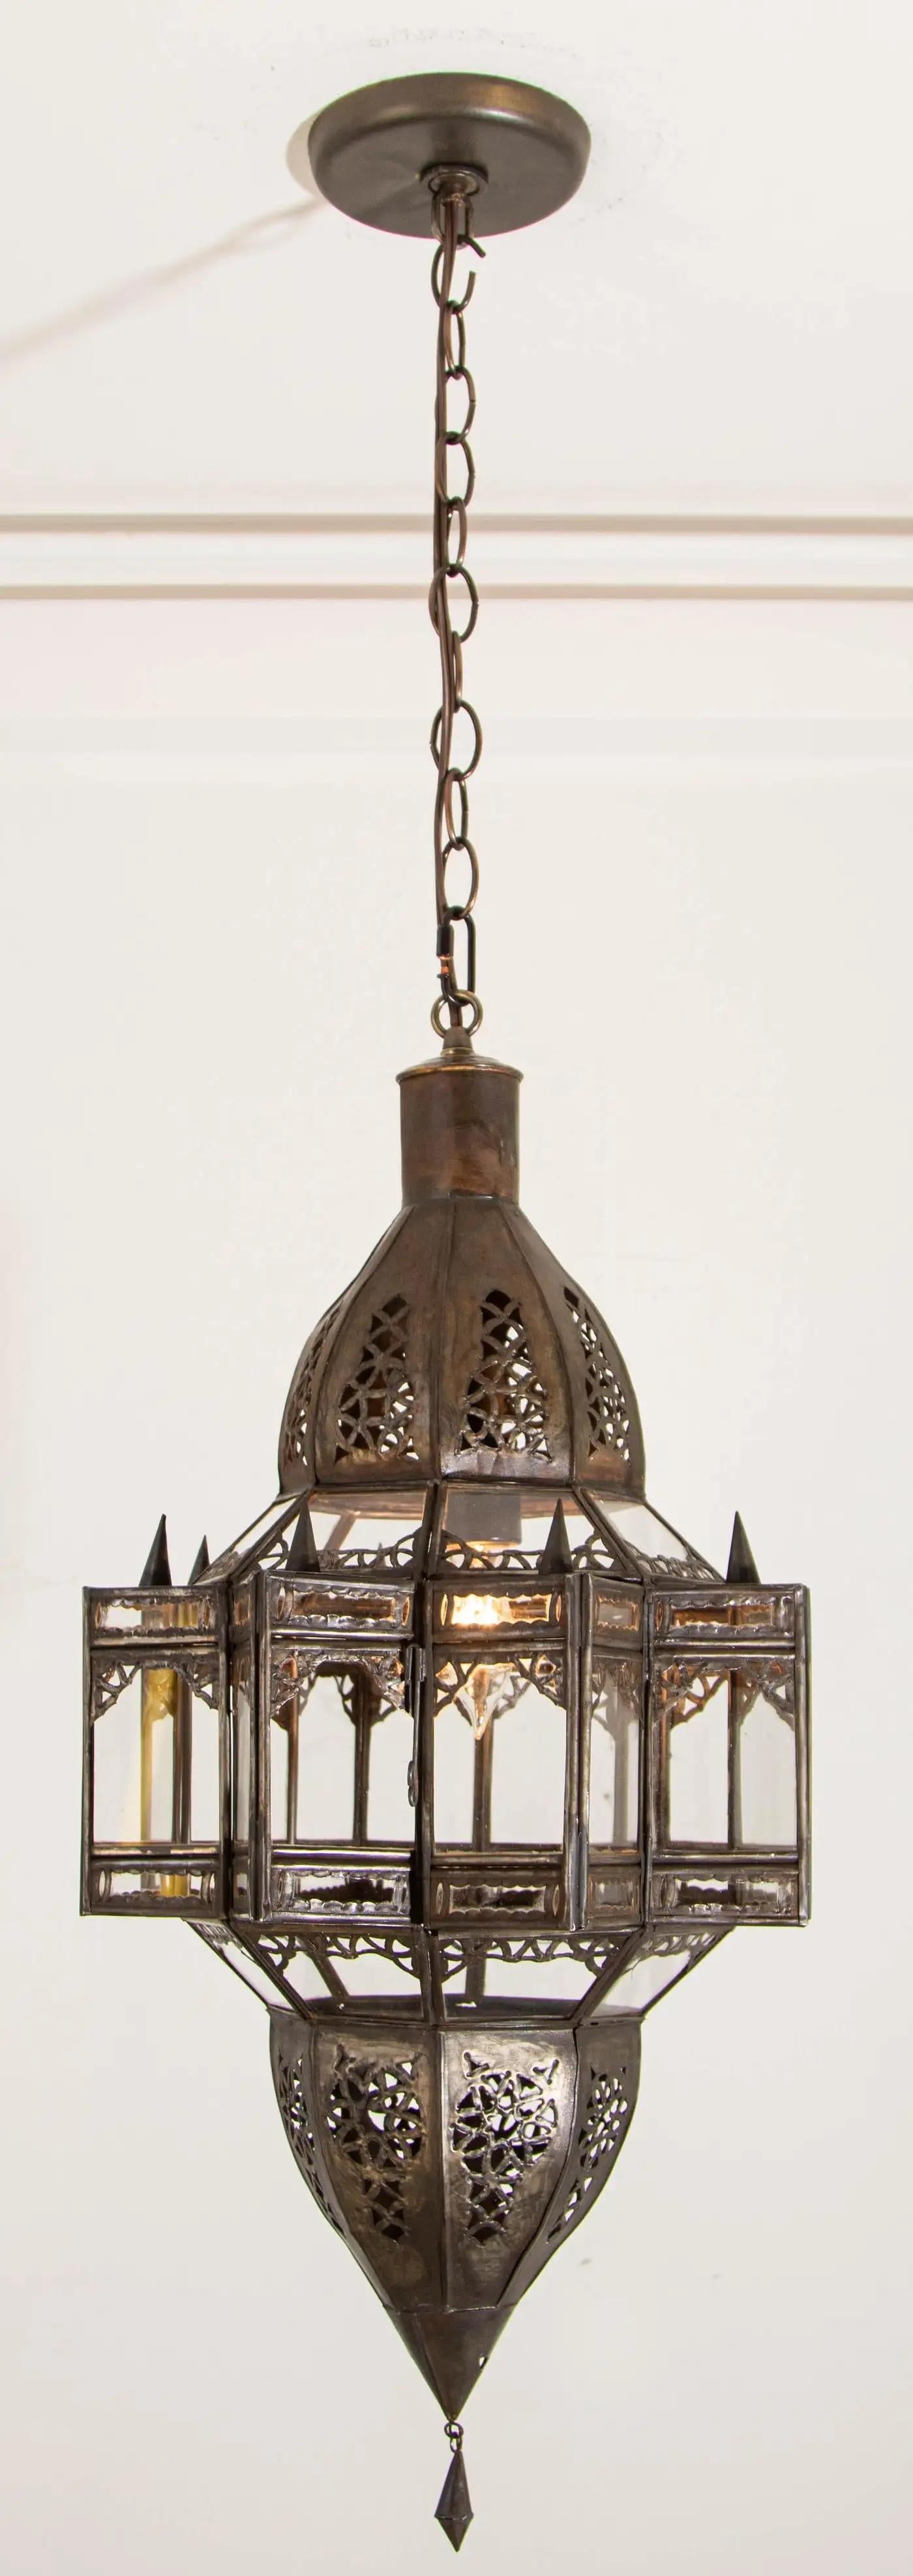 Vintage Moroccan Moorish star shape clear glass and metal lantern.
Clear Glass star shape lantern pendant handcrafted by Moroccan skilled artisans in Marrakech.
The metal is hand-cut in floral and geometric Moorish Islamic designs.
The lantern is